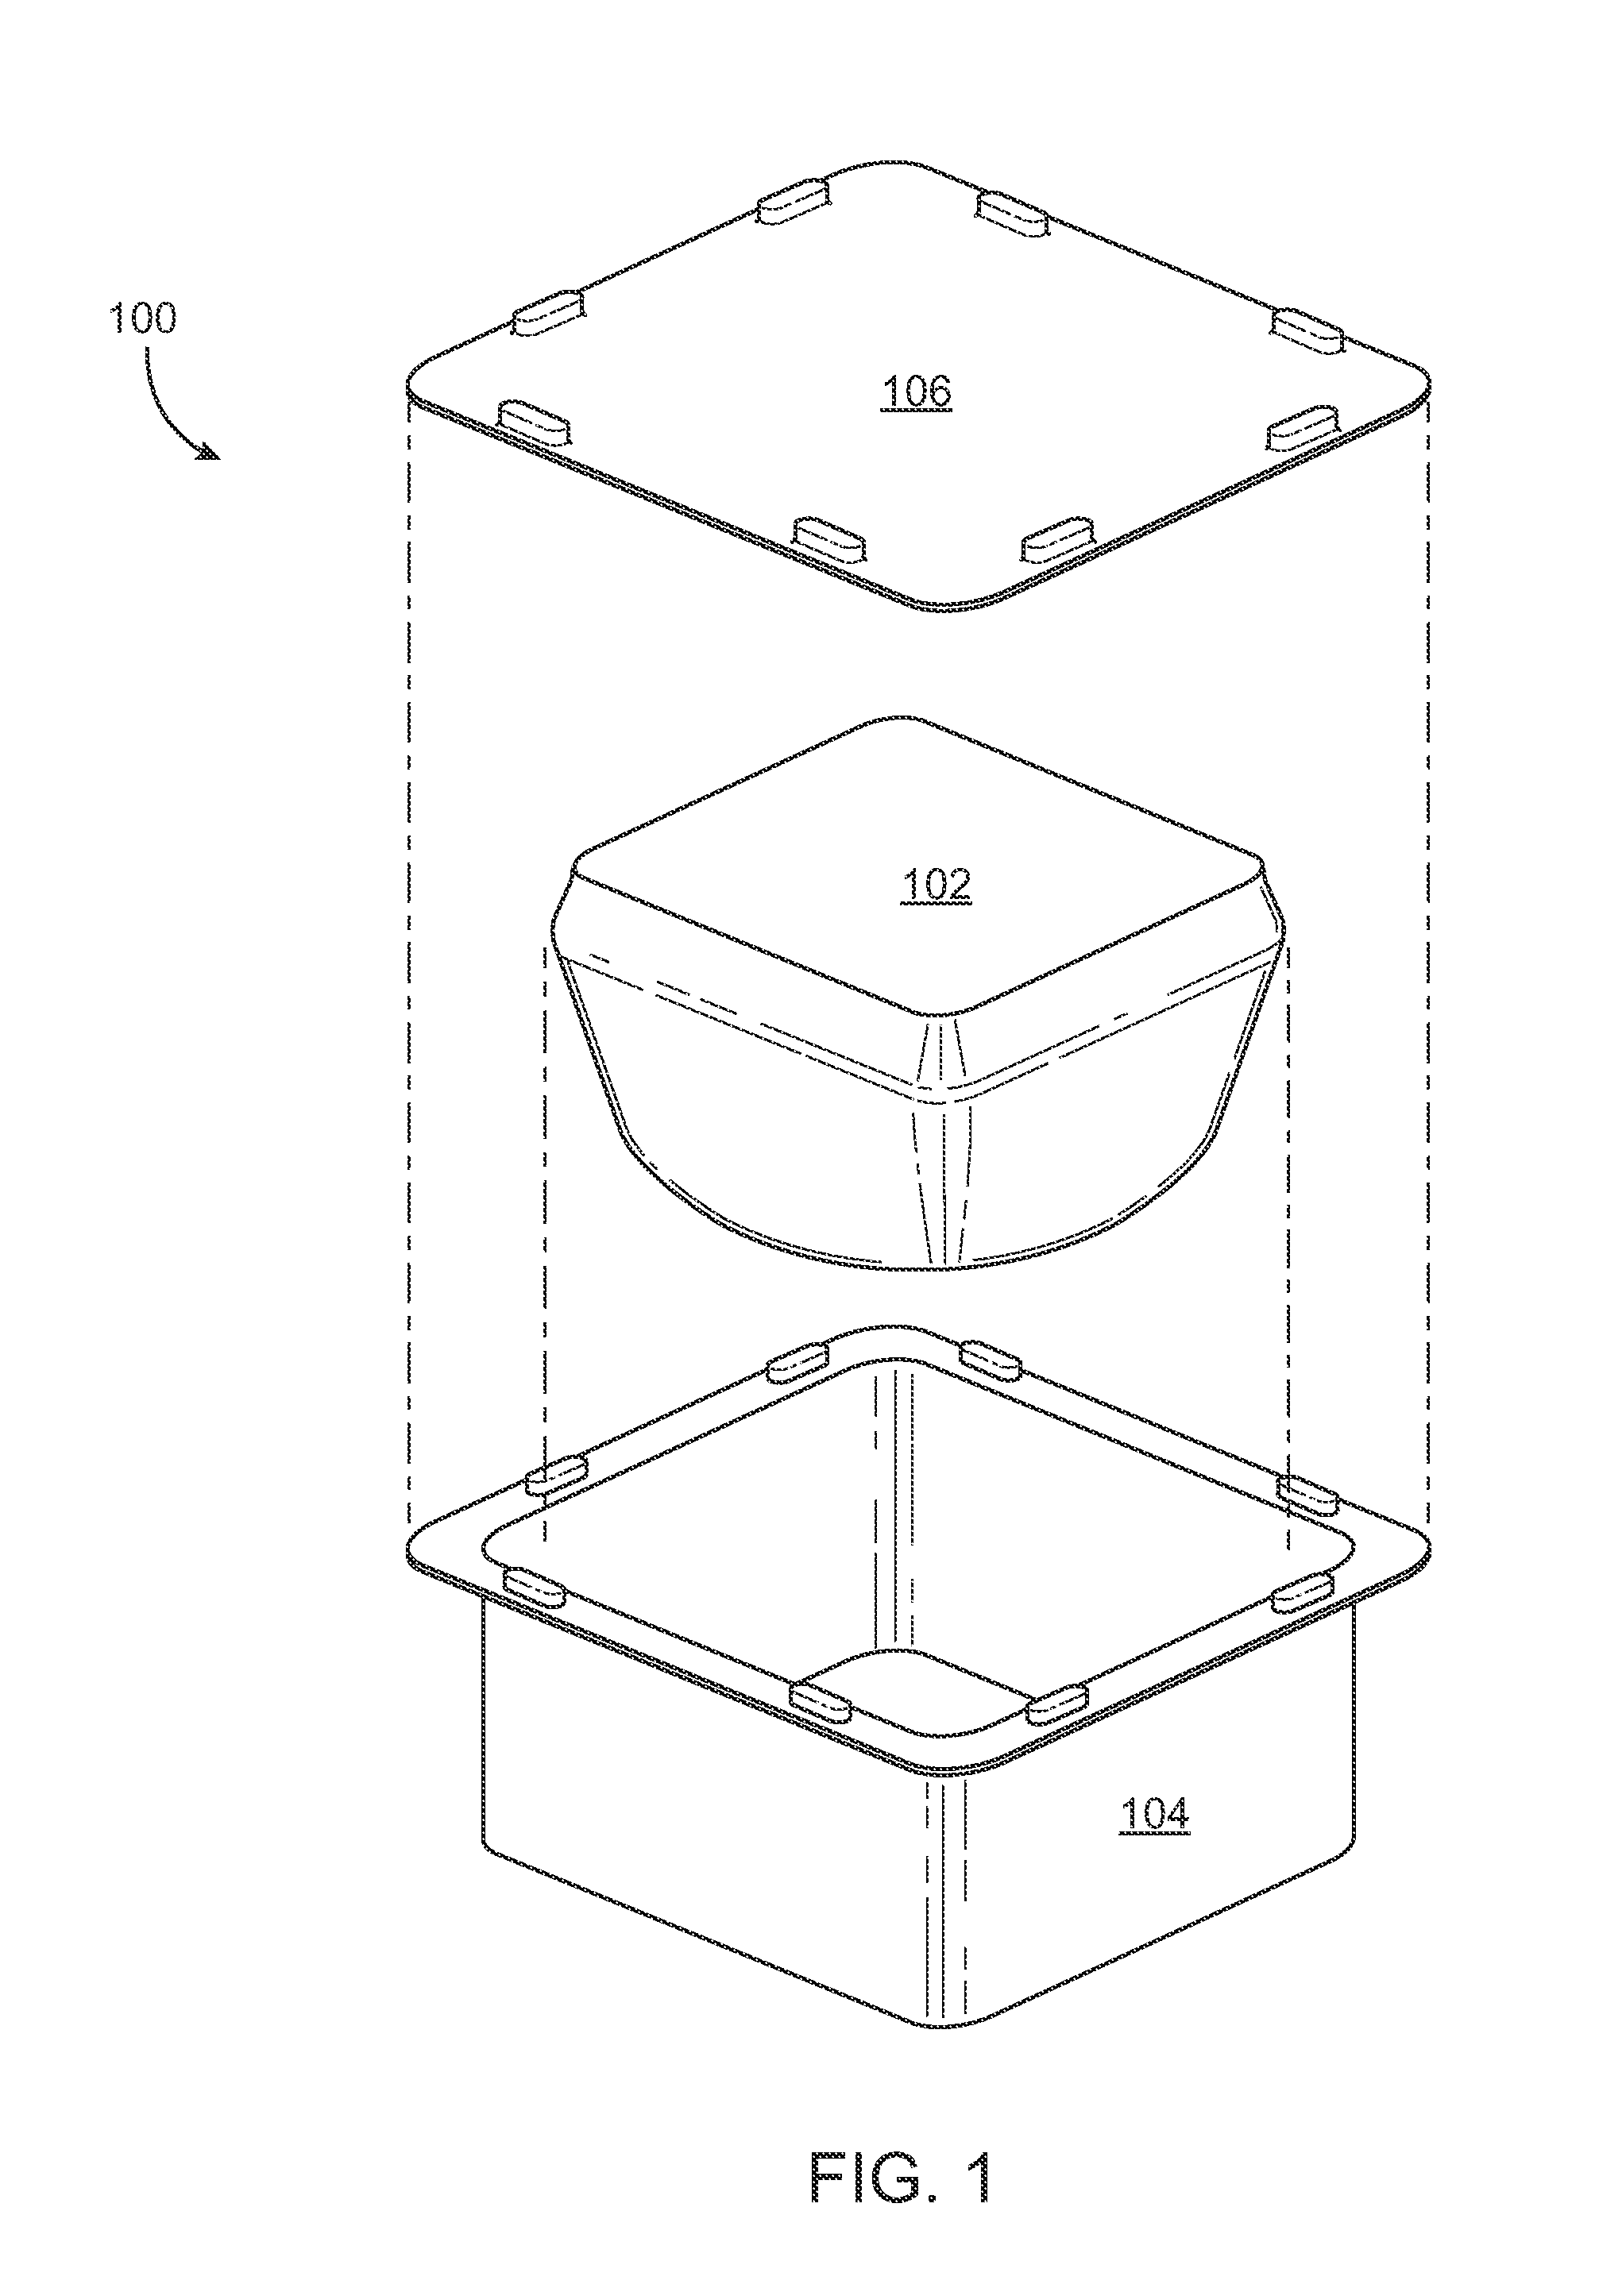 Modified atmosphere packaging for ultrasound transducer cartridge